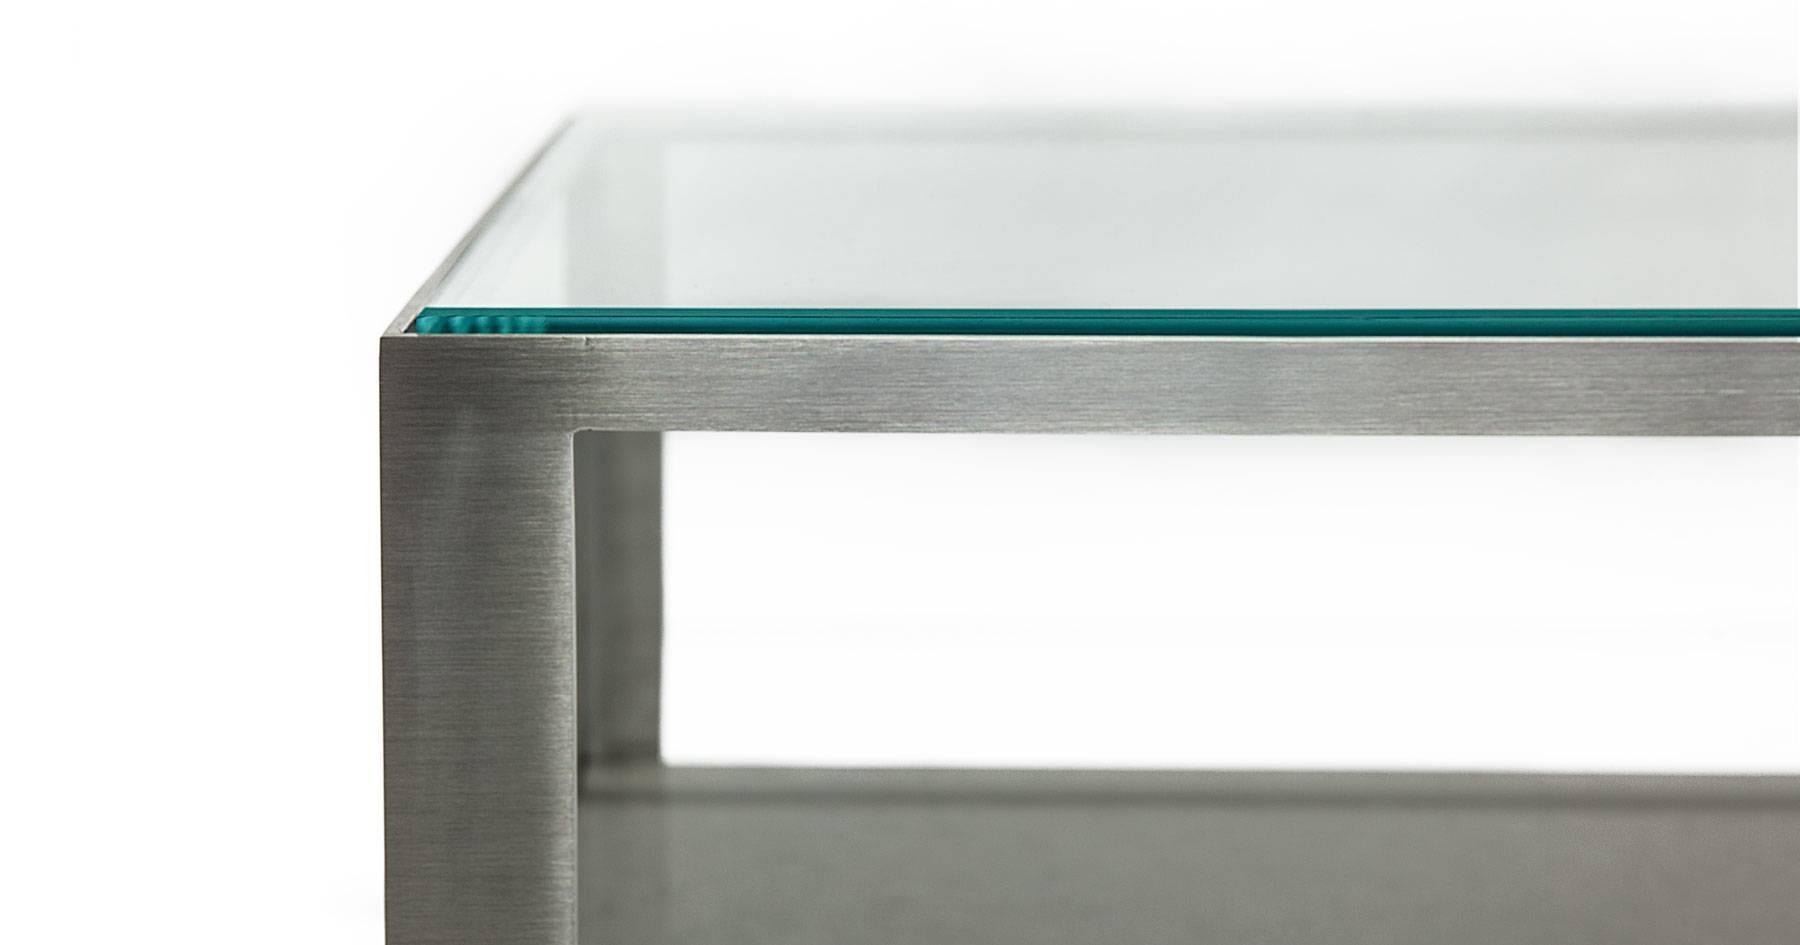 A brushed stainless steel frame and a ½-inch thick tempered glass top give the Perry coffee table sleek and streamlined look that creates a striking focal point in any living room. A 1 ½-inch gray marble shelf offers plenty of space to display books